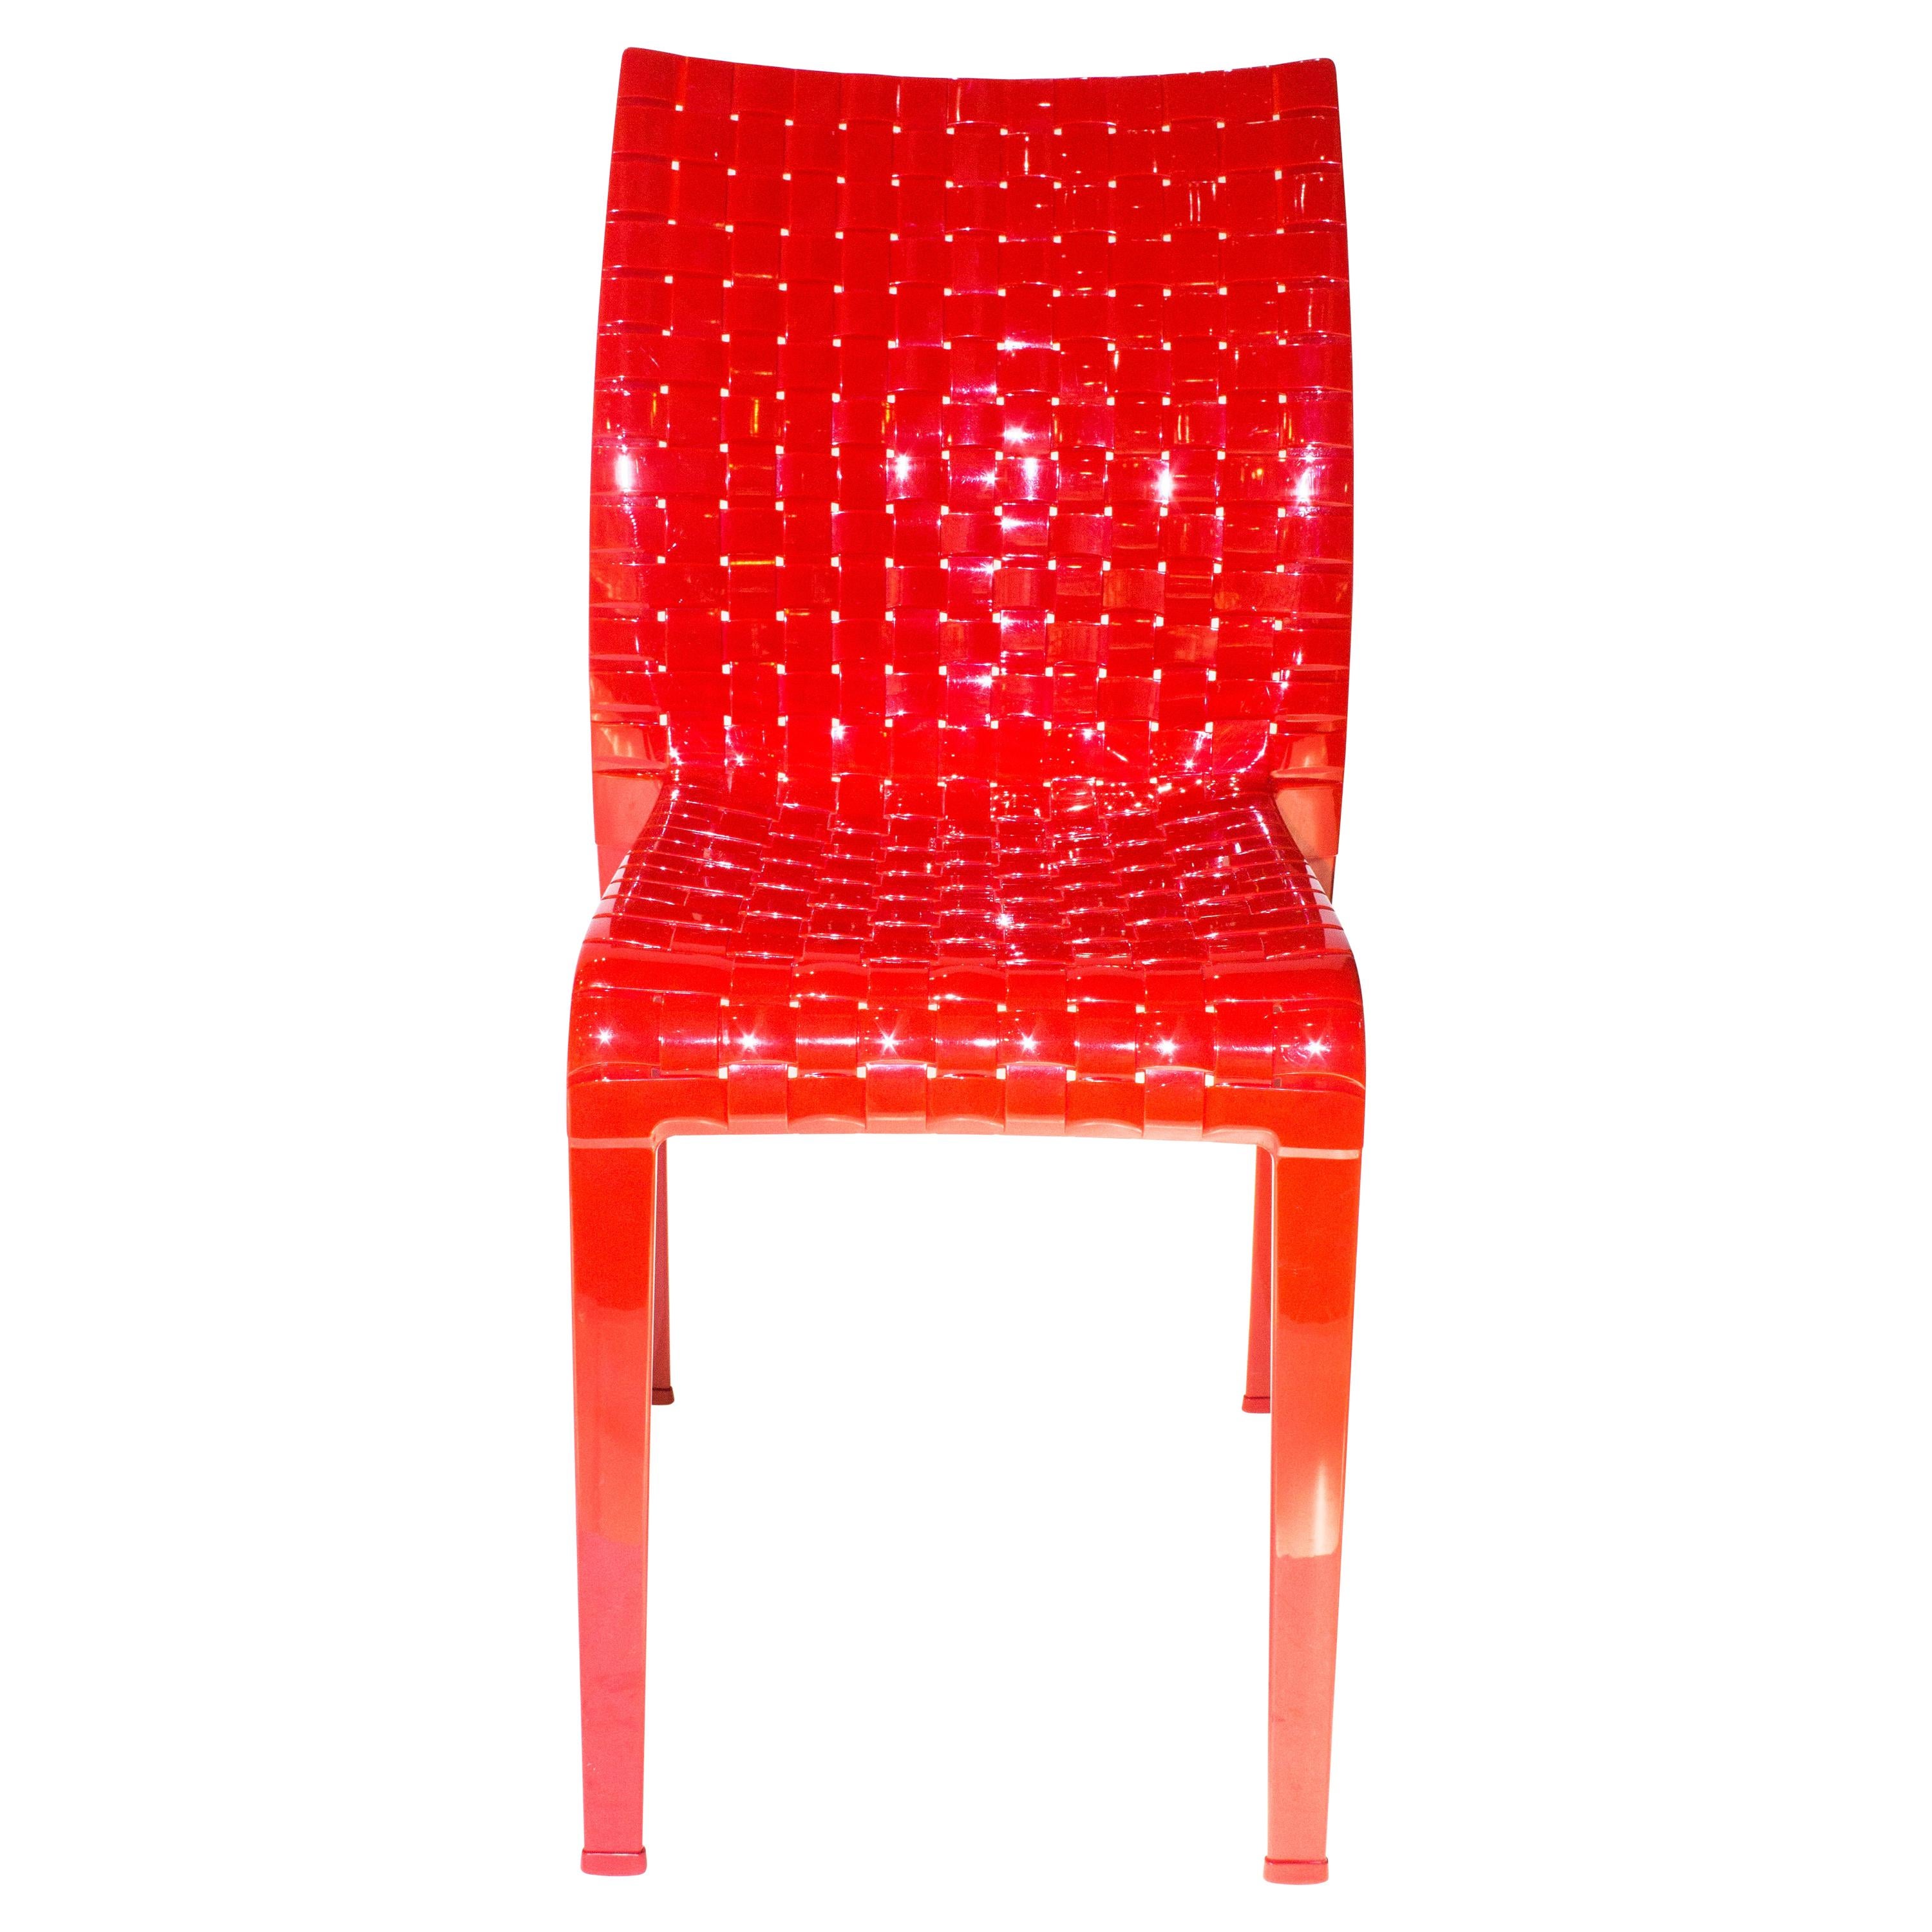 Kartell Ami Ami Chair in Red by Tokujin Yoshioka For Sale